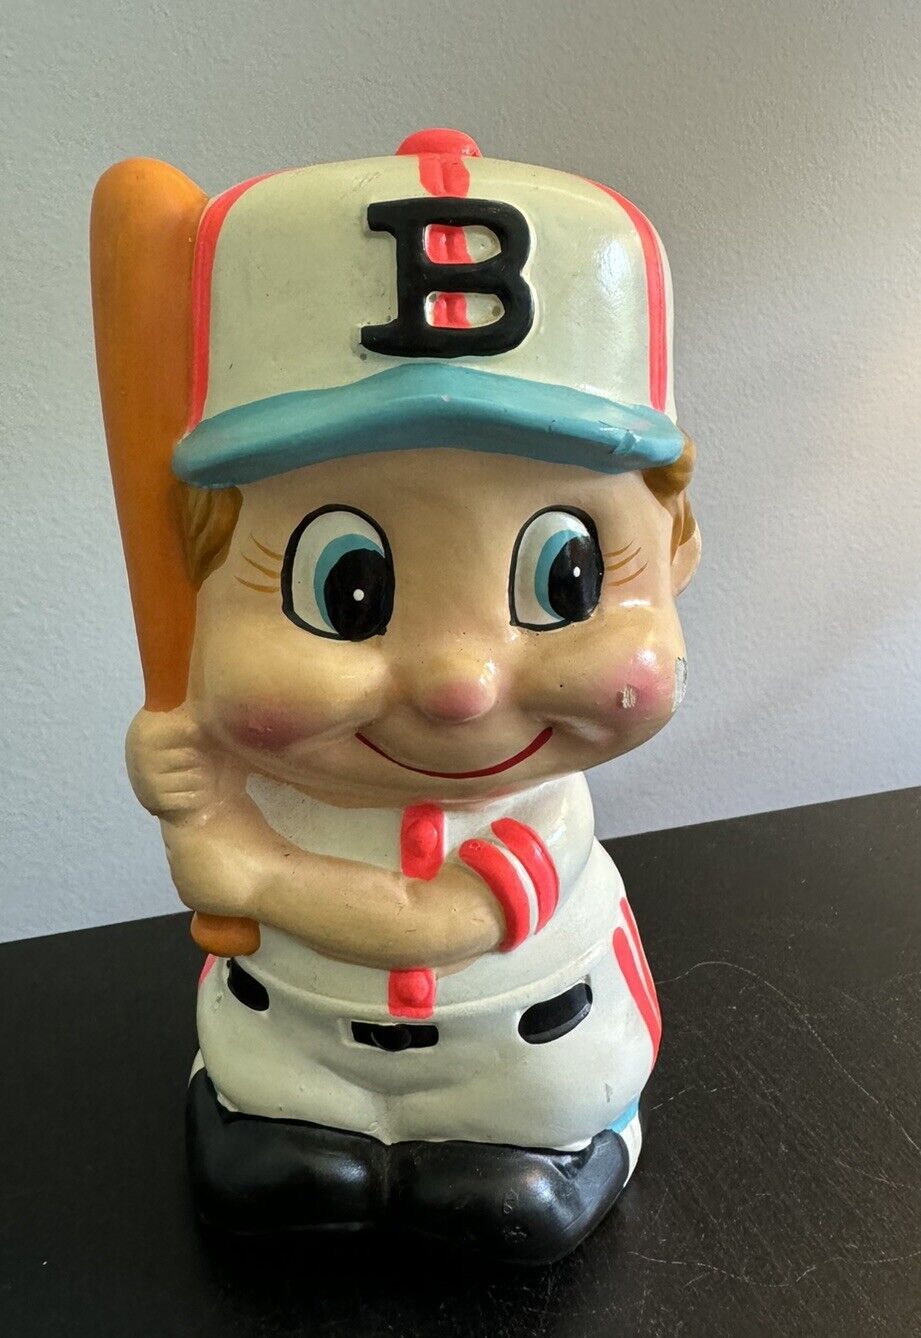 Vintage Baseball Player Figurine Coin Piggy Bank Made in Japan